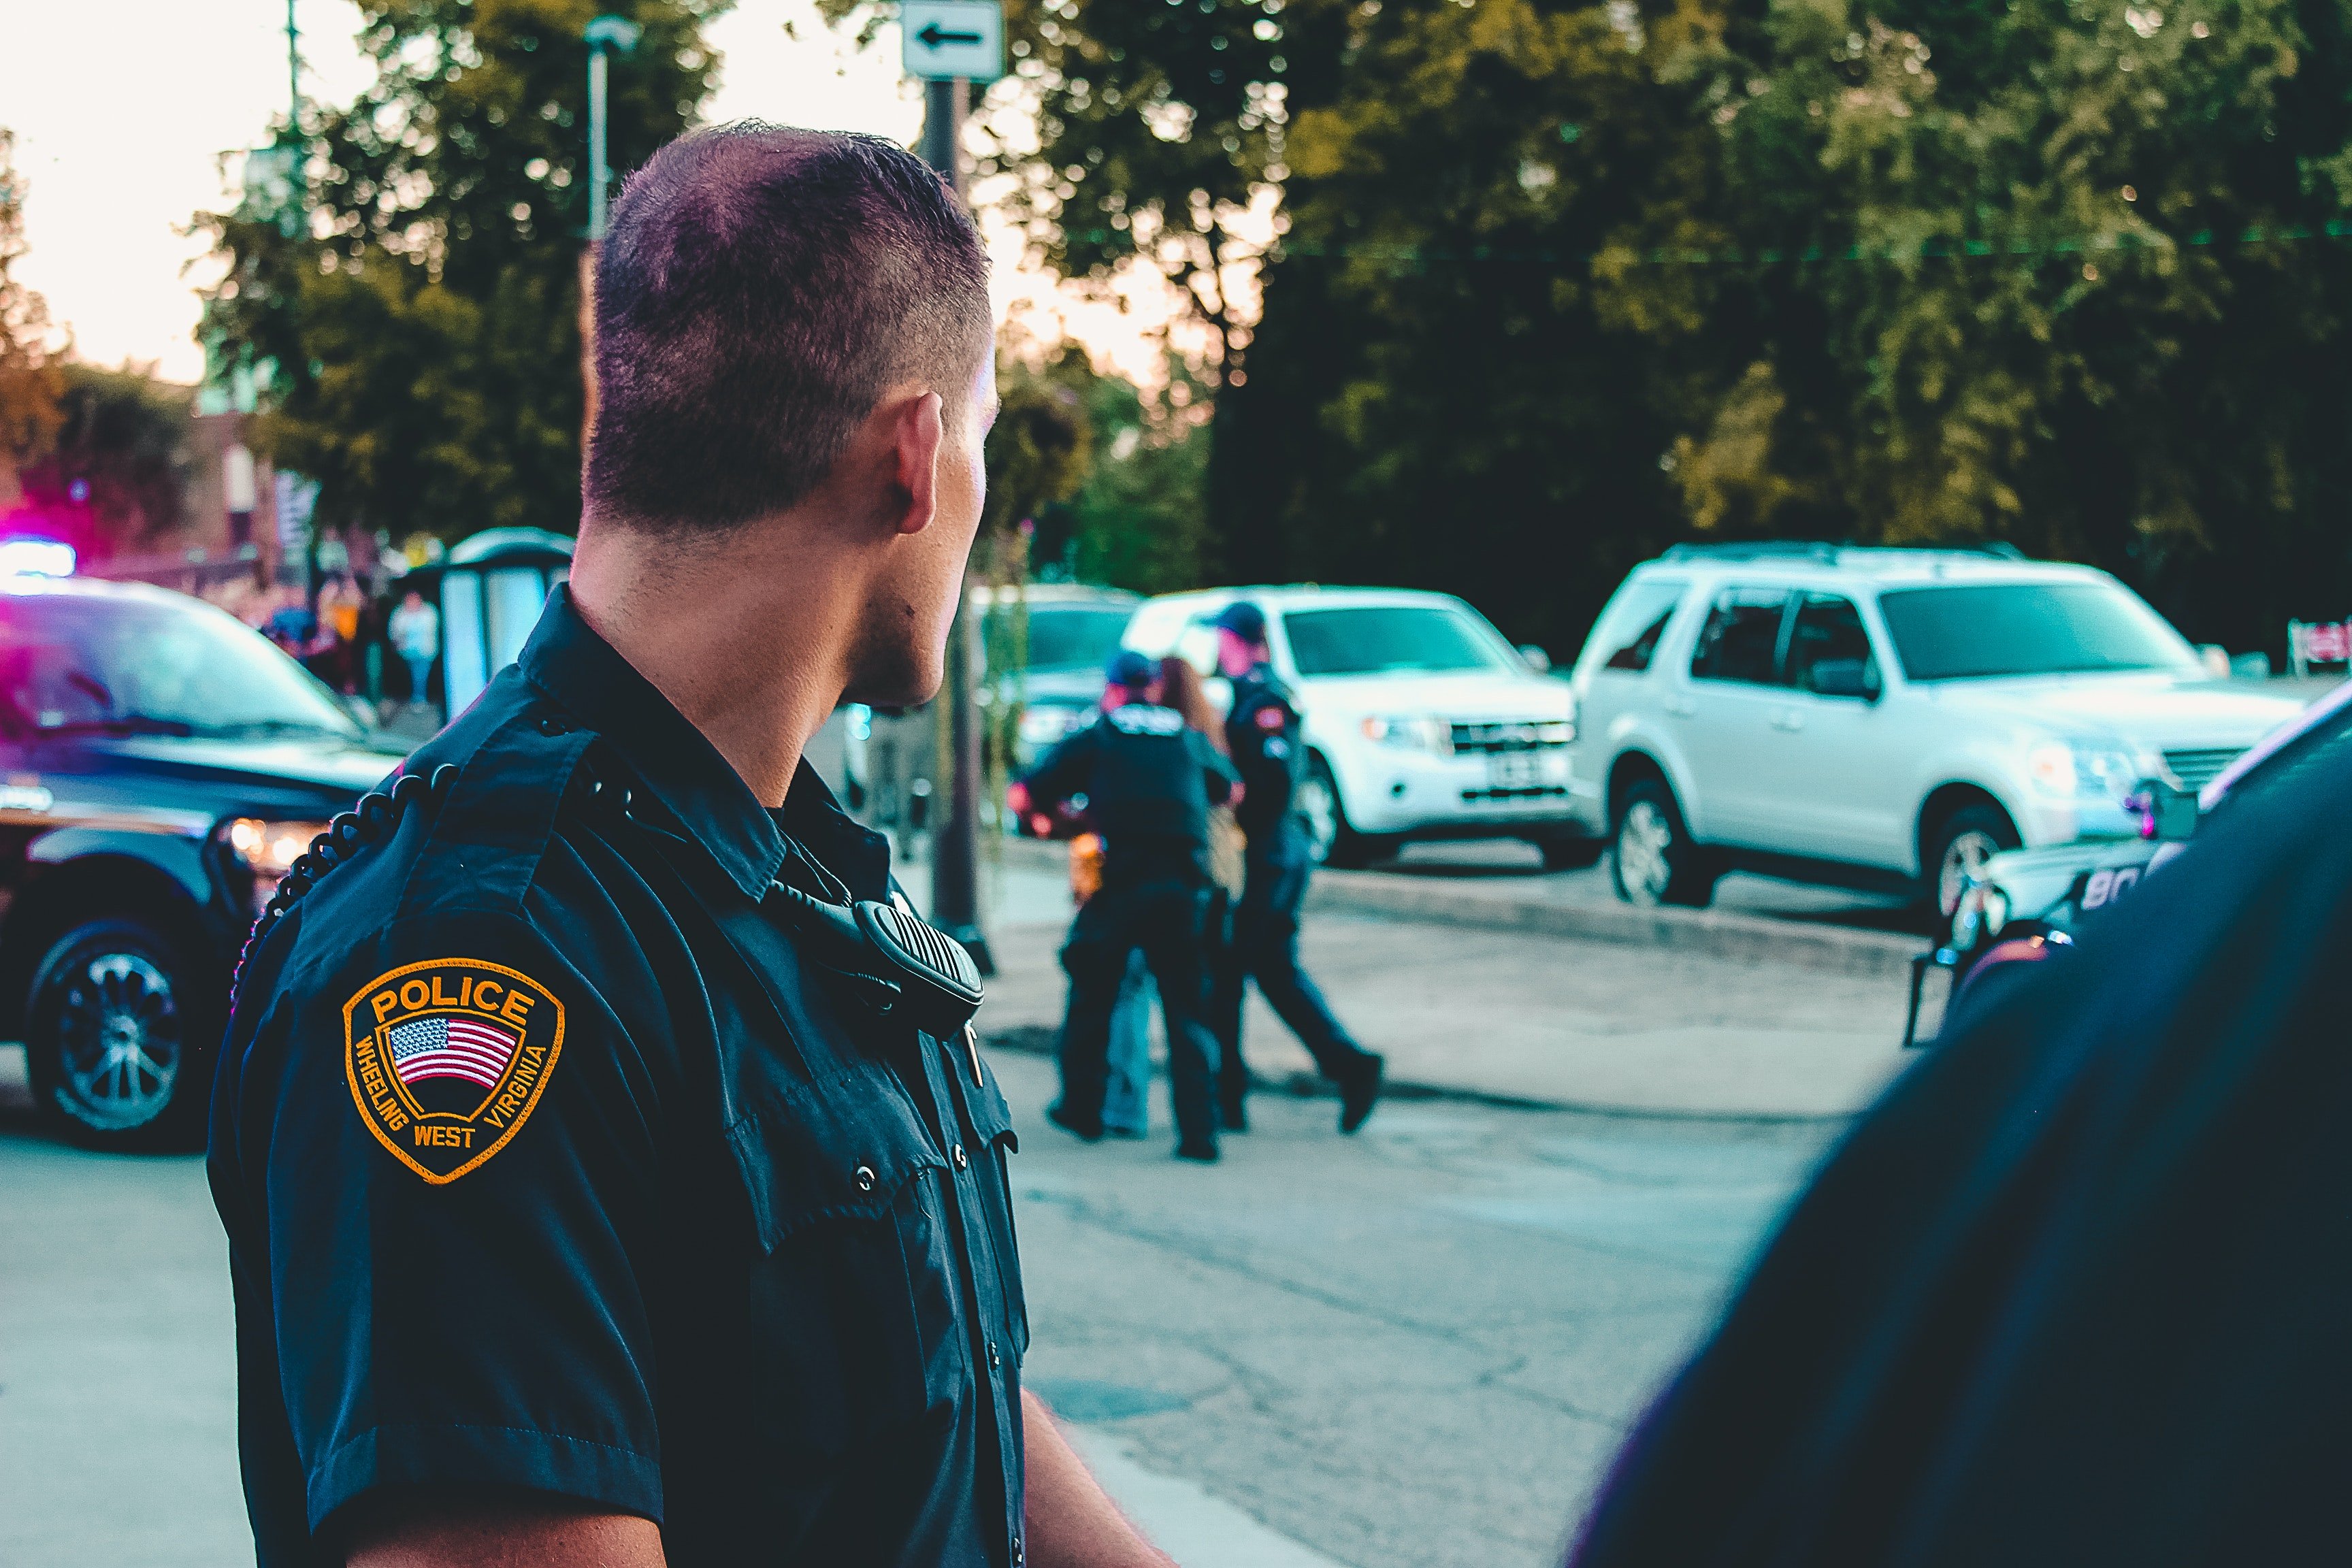 An officer looking over his shoulder. | Source: Pexels/ Rosemary Ketchum